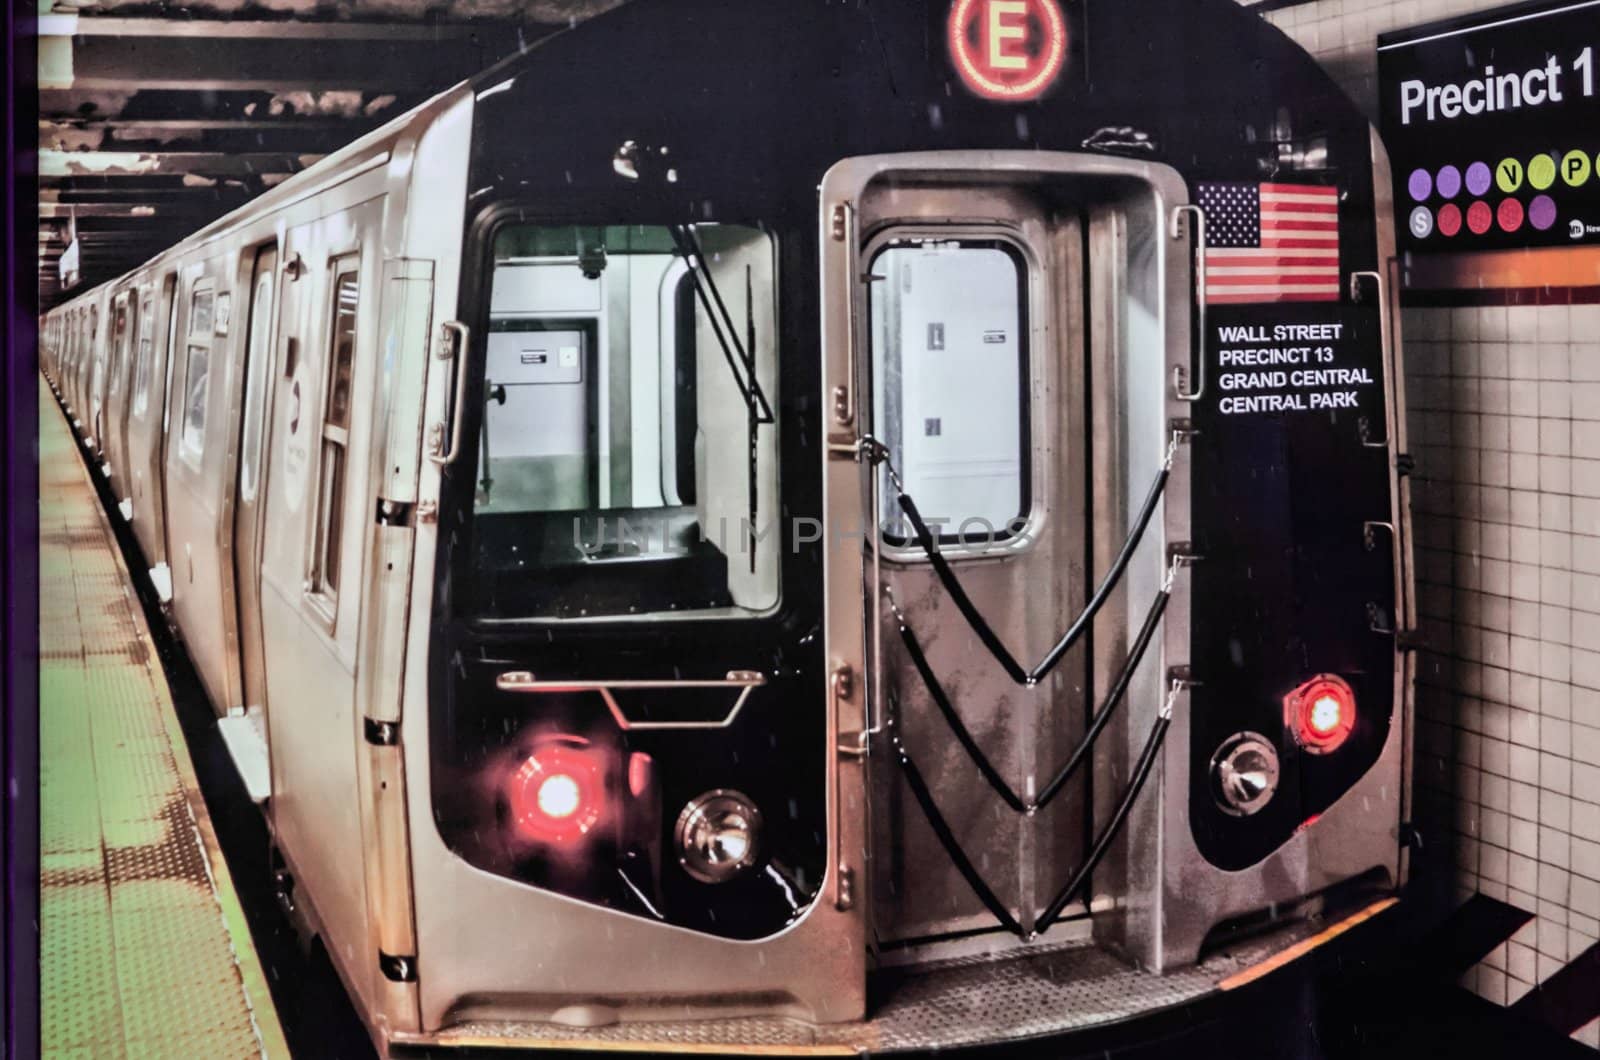 Subway train seen painted on a wall